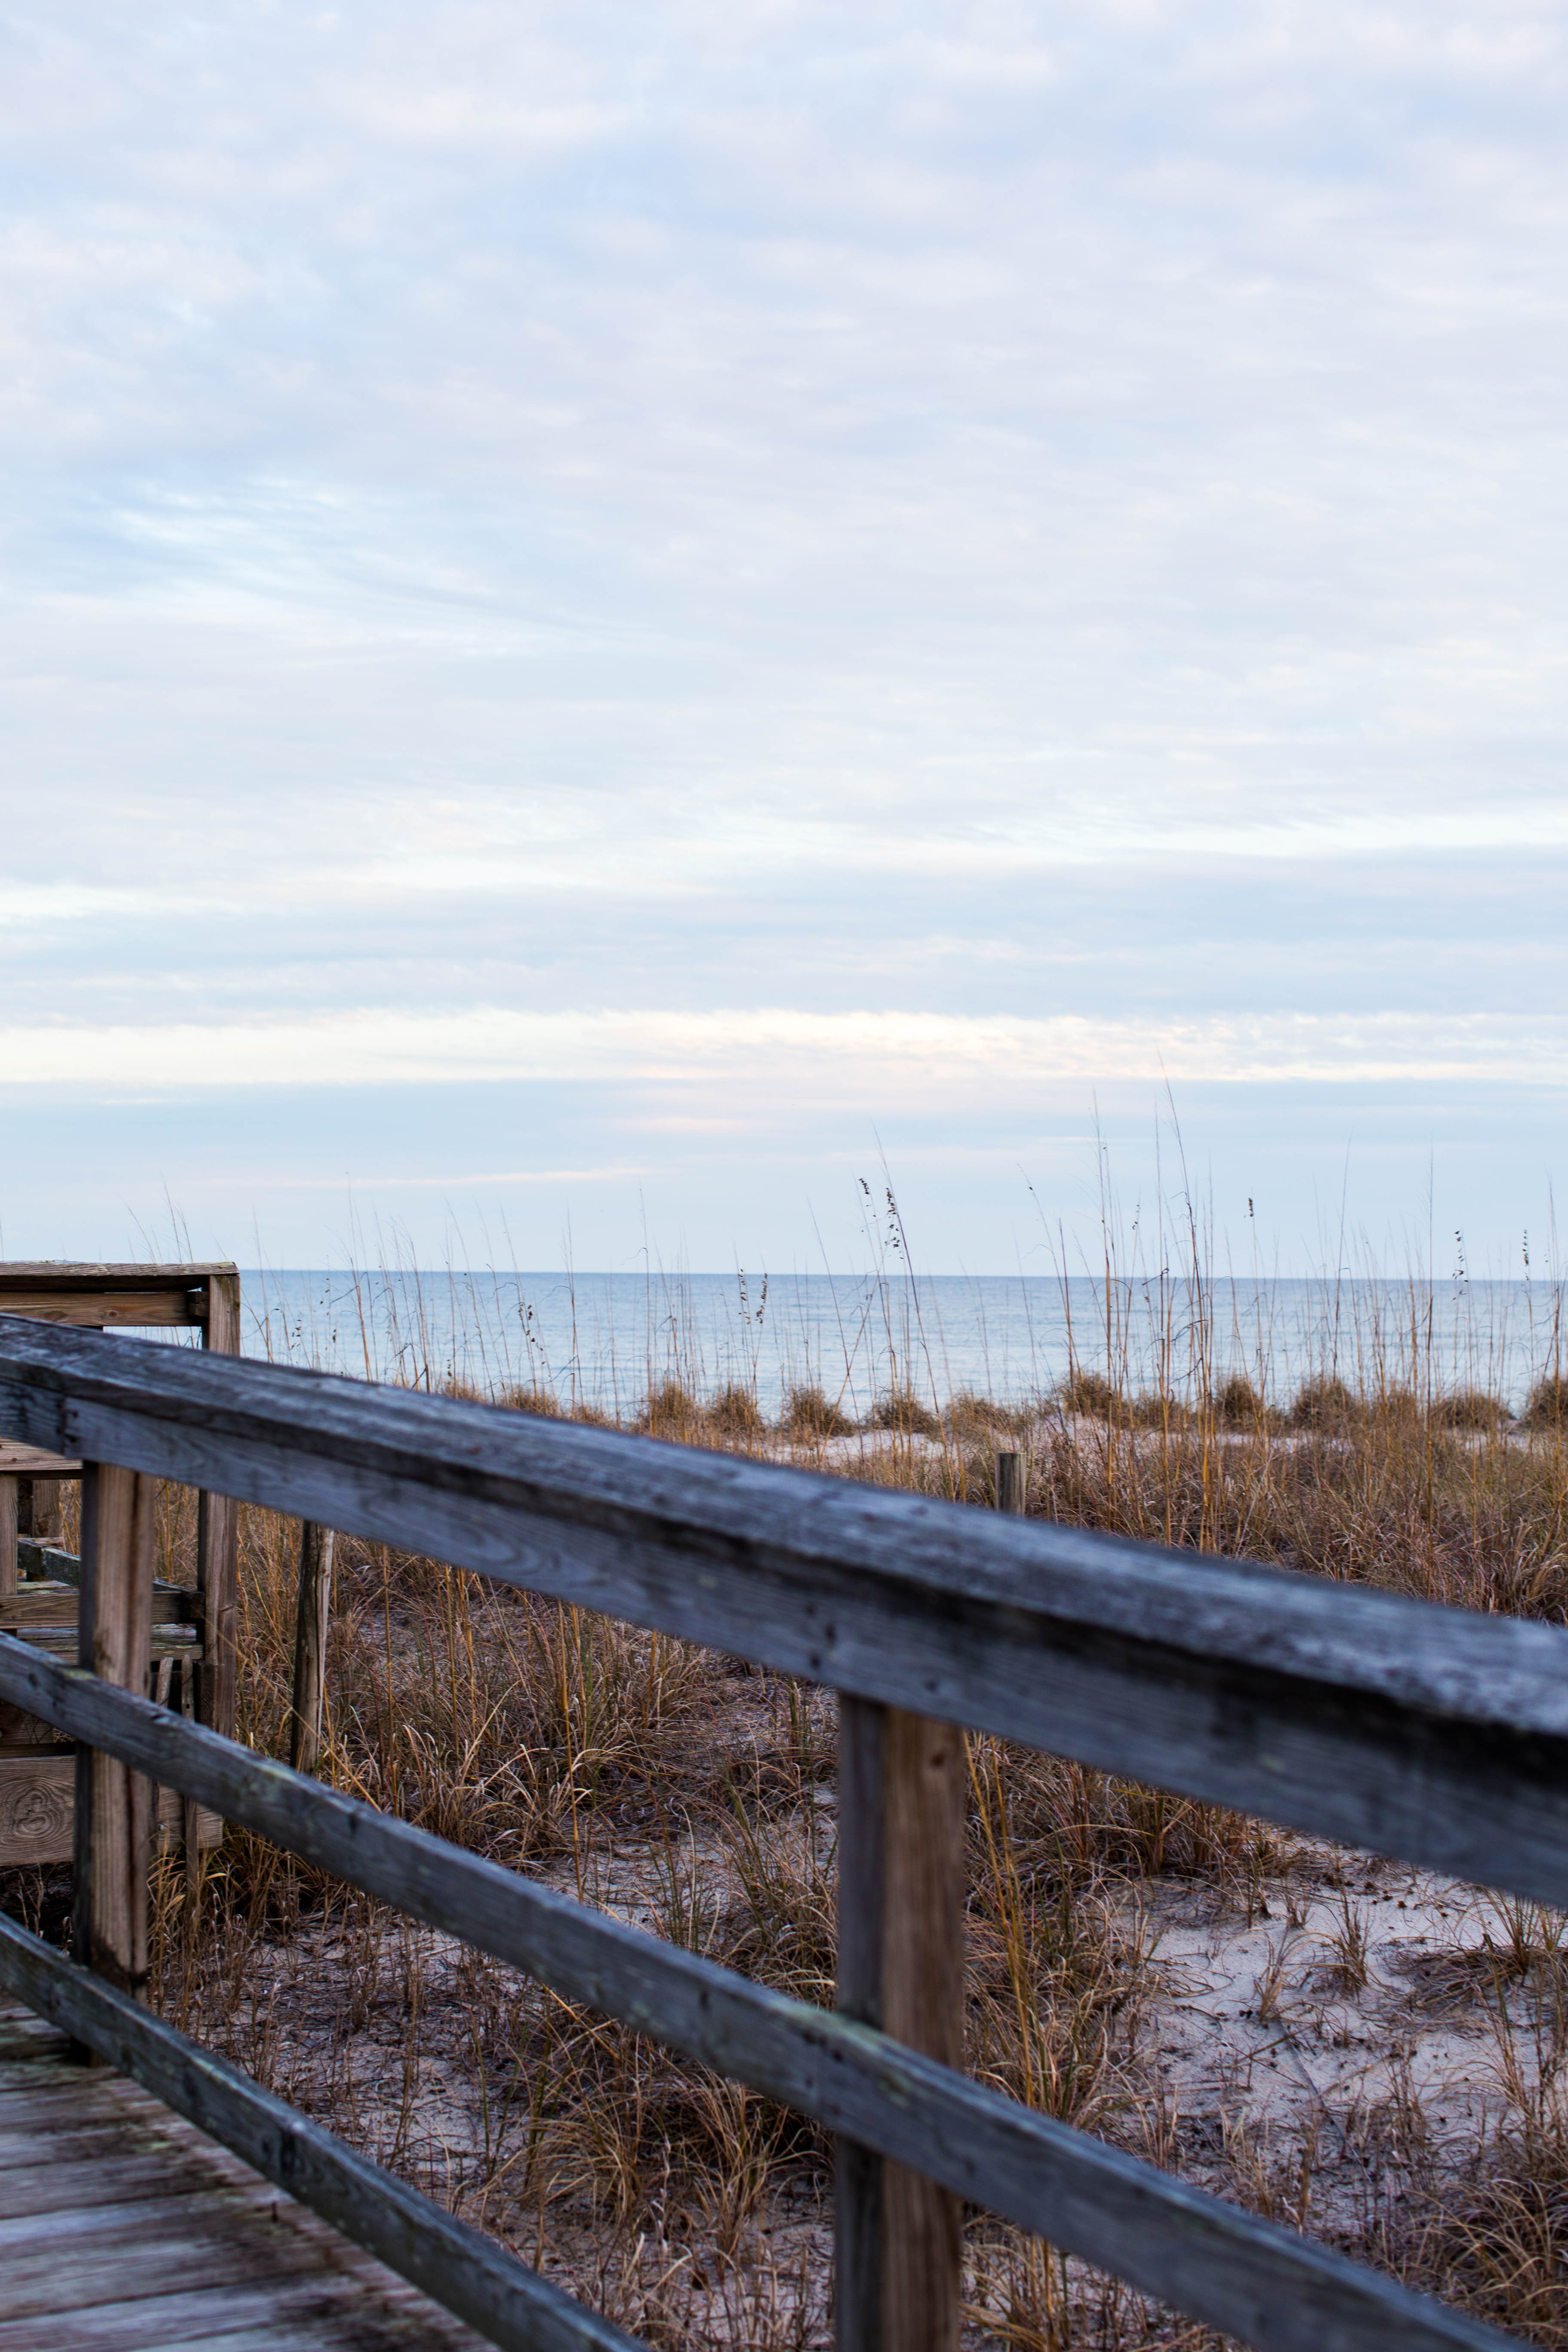 5 Reasons Why You Should Visit the Beach In Winter by NC blogger Coffee Beans and Bobby Pins